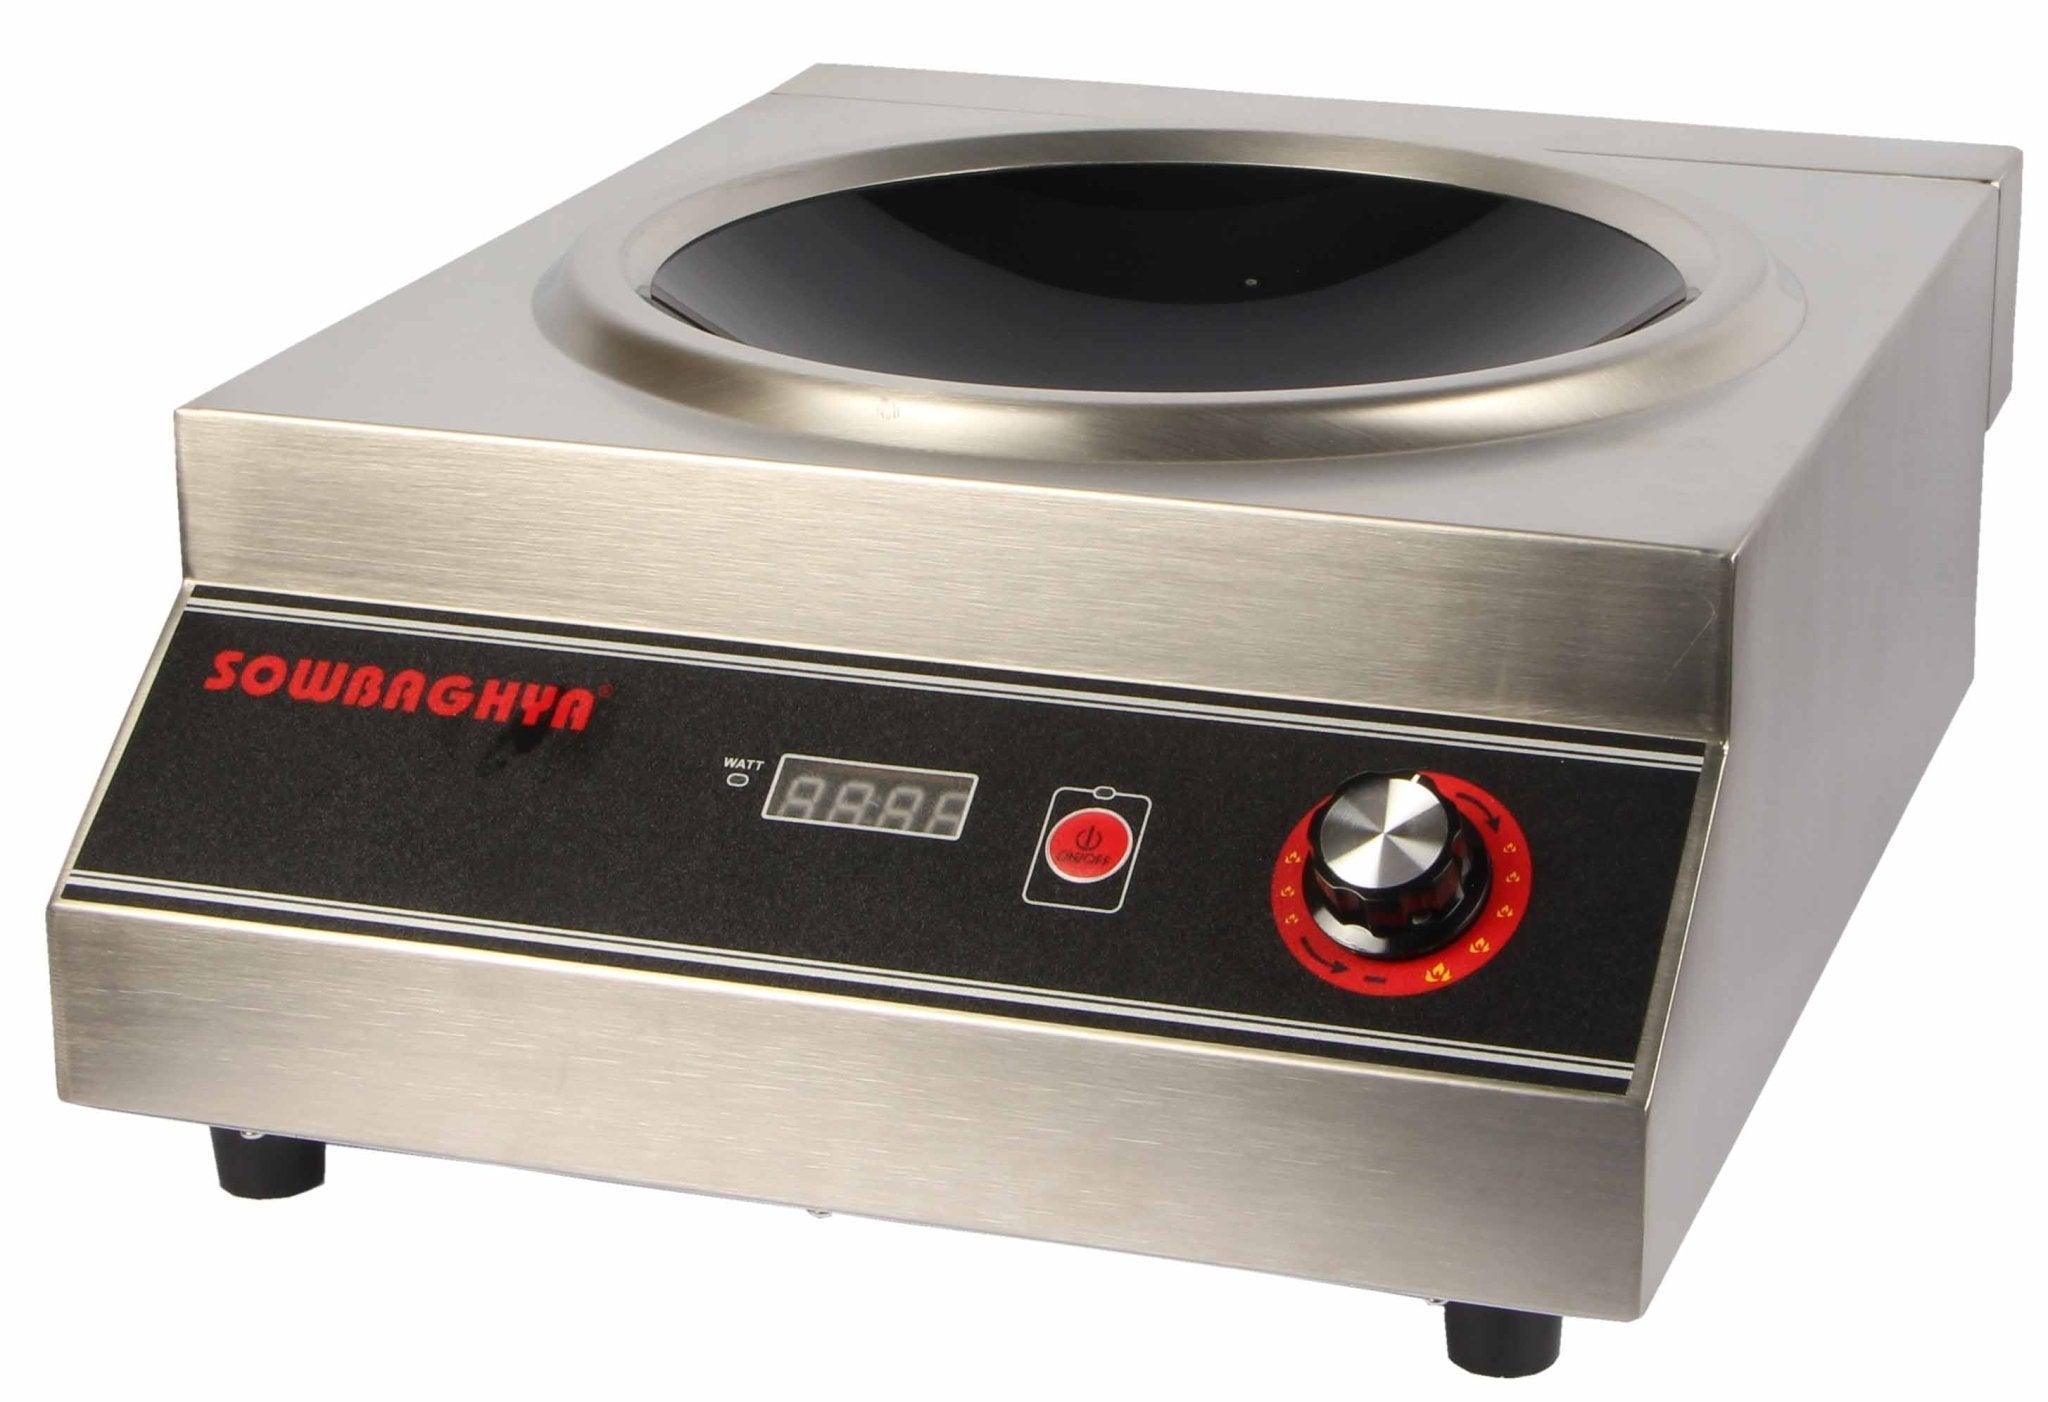 Commercial Wok Induction Stove - 5000W - SOWBAGHYA